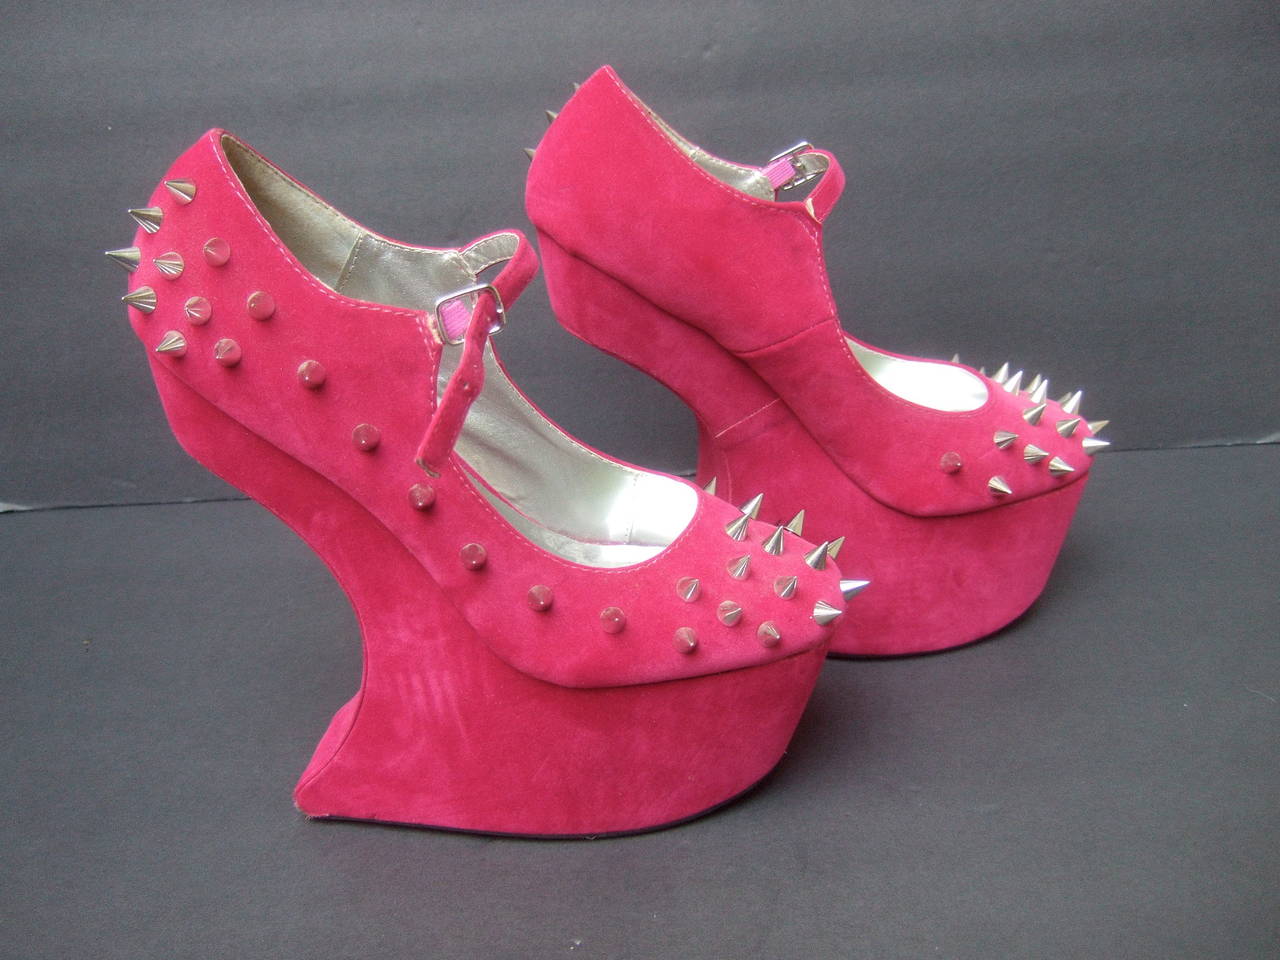 Avant-garde fuchsia velvet spike platform shoes US Size 9 
The edgy sky high platforms shoes are designed with
chrome metal industrial spikes on the front & outer sides

The show stopping ankle strap platforms make a very dramatic 
jaw dropping